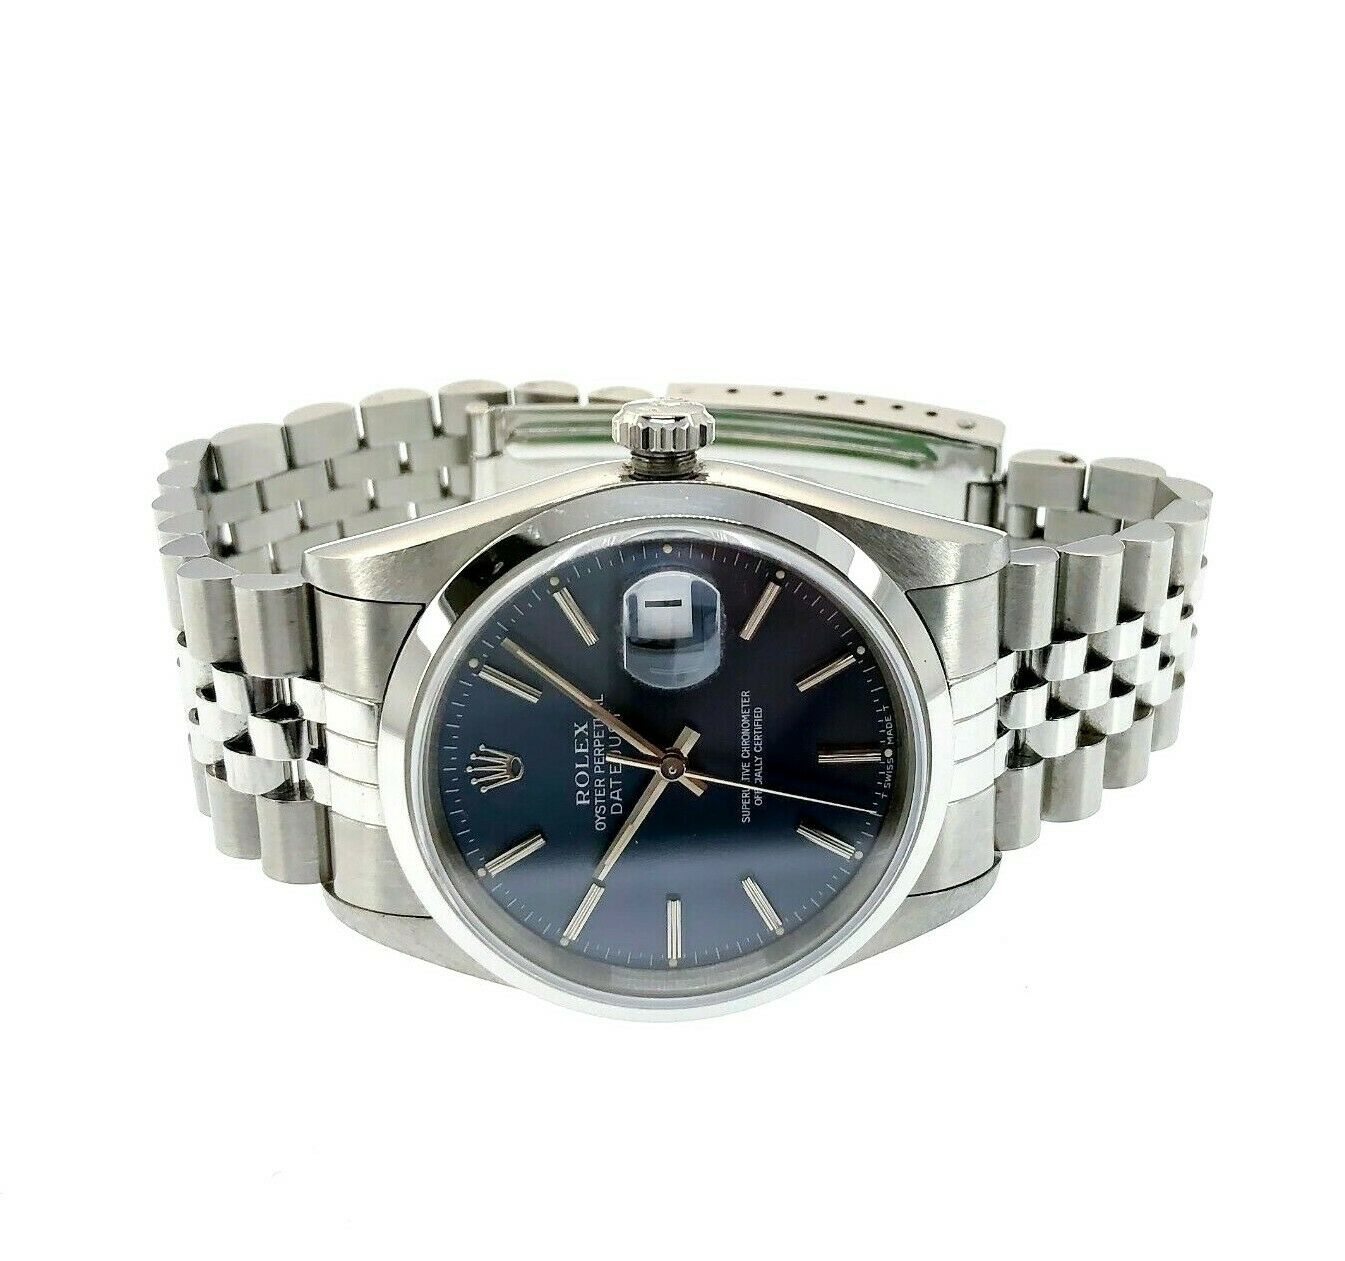 Rolex 36MM Datejust Watch Stainless Steel Ref #16200 Jubilee Band Box Papers